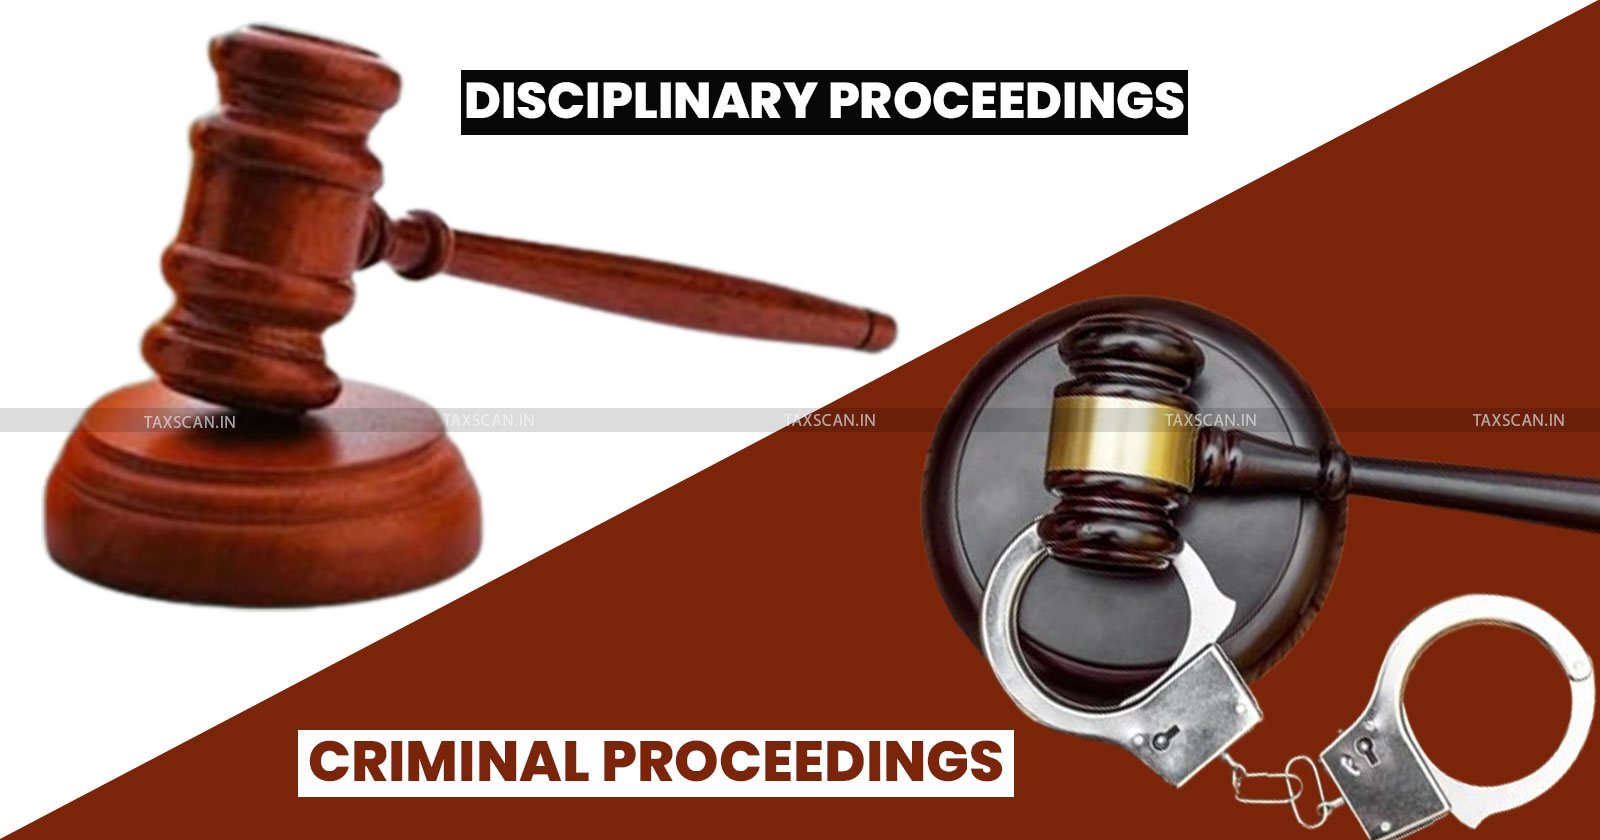 ICAI - Institute of Chartered Accountants of India - Disciplinary Proceedings vs. Criminal Proceedings - ICAI Standards of Proof - Taxscan